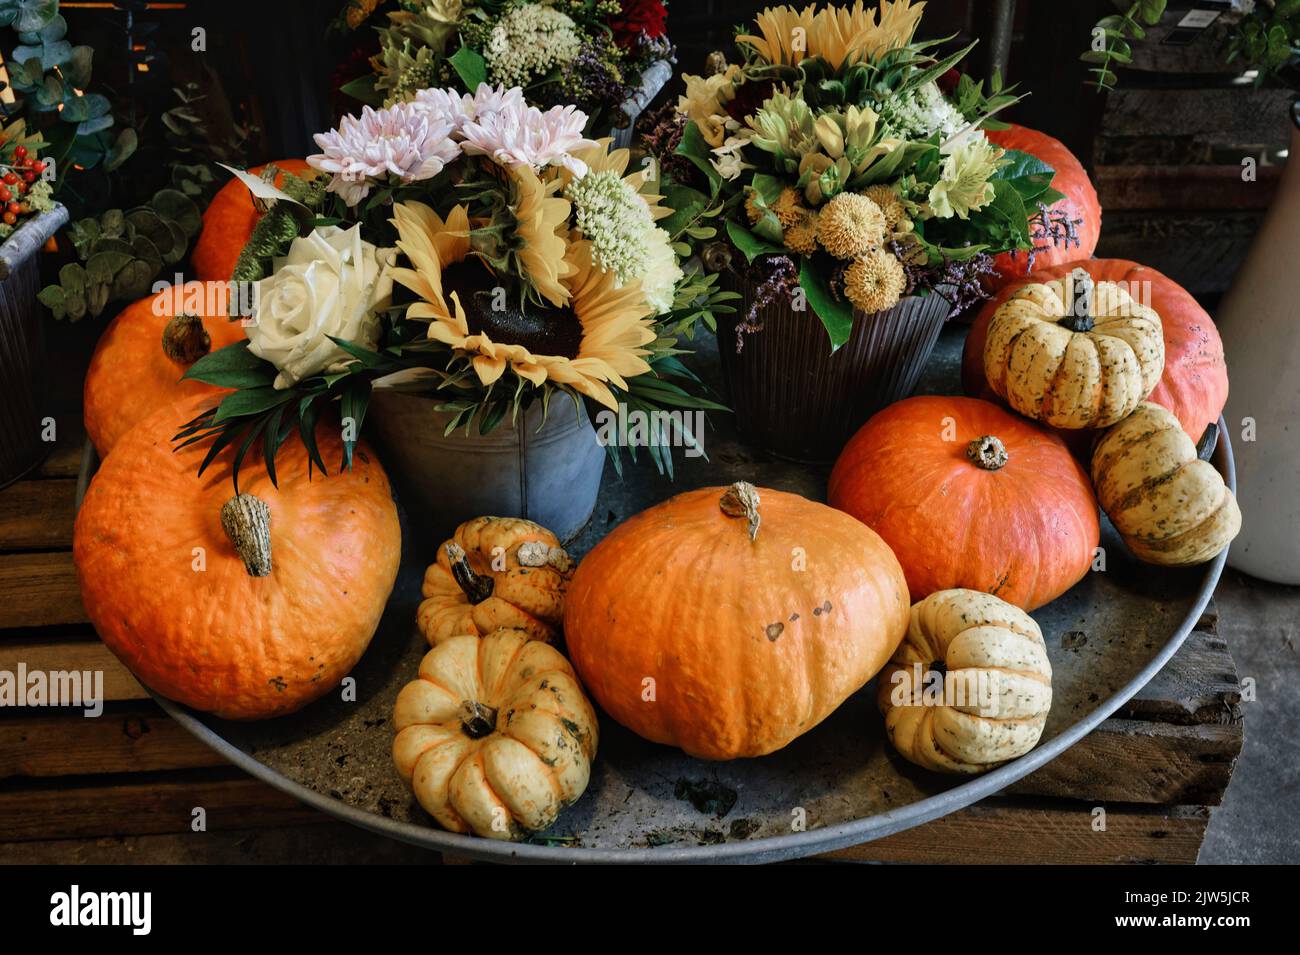 an autumnal arrangement with various pumpkins and flowers on a large metal bowl at an autumn market Stock Photo